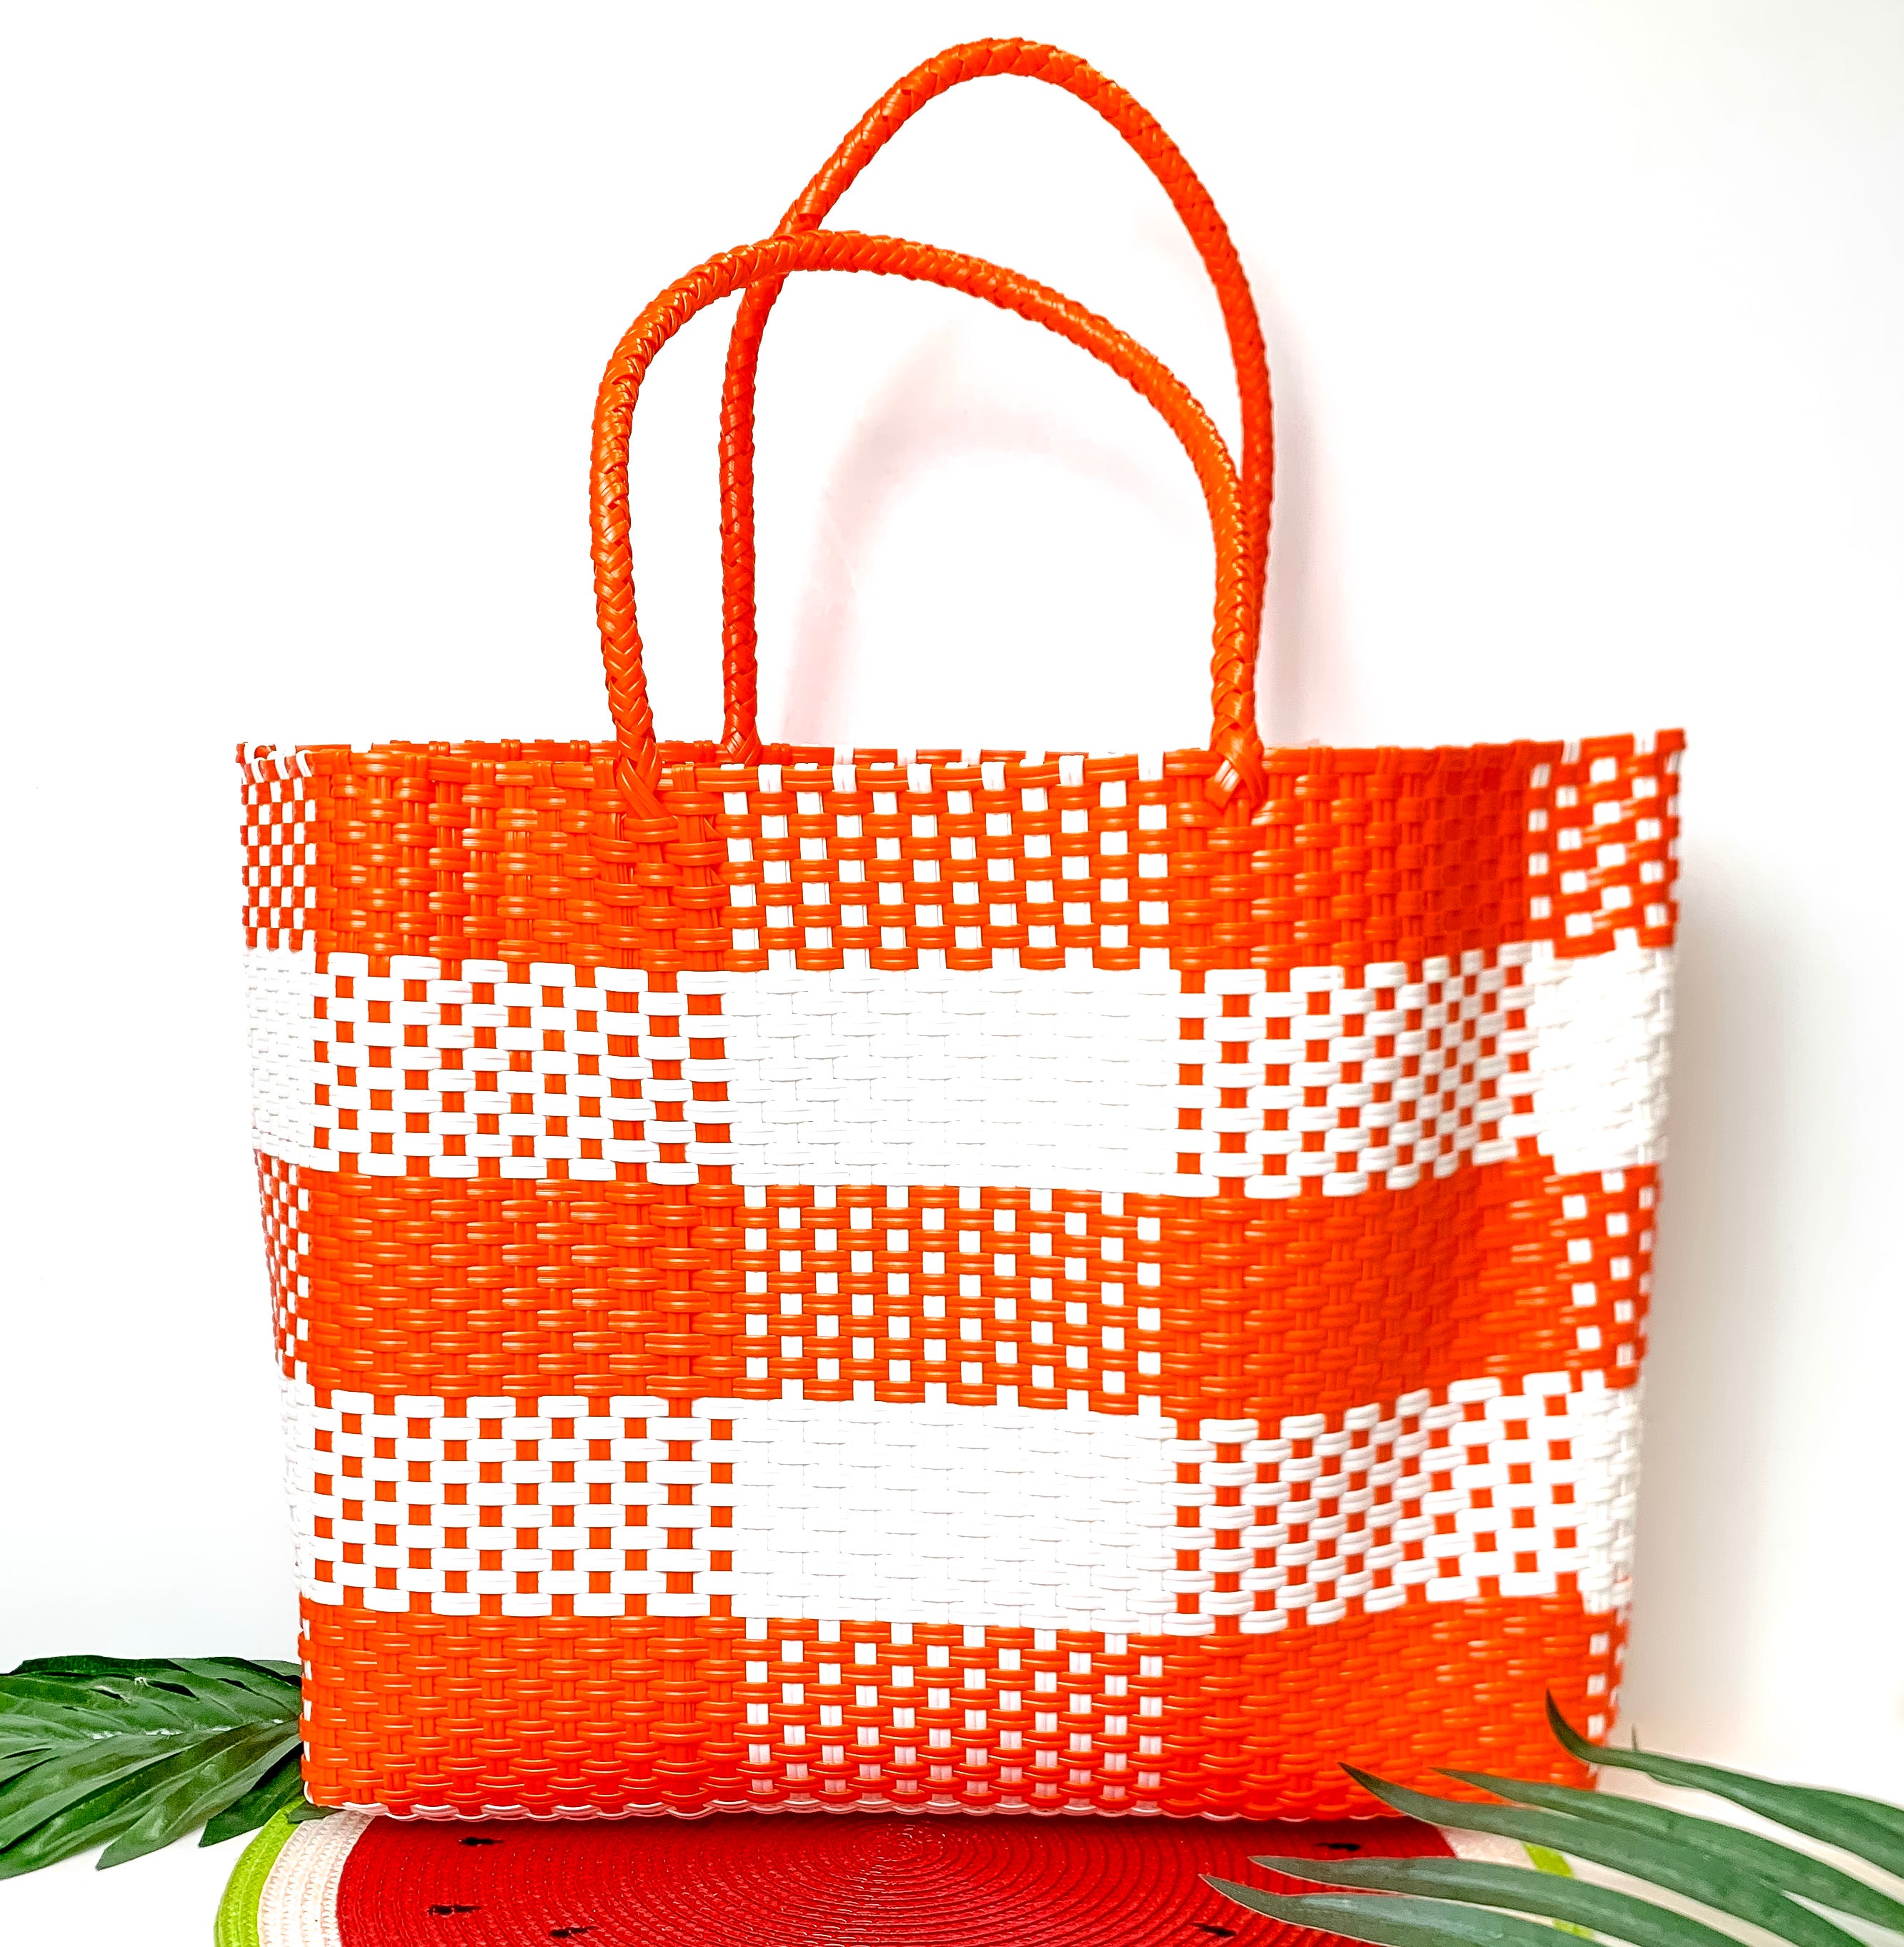 Garden Party Gingham Tote Bag in Orange and White - Giddy Up Glamour Boutique